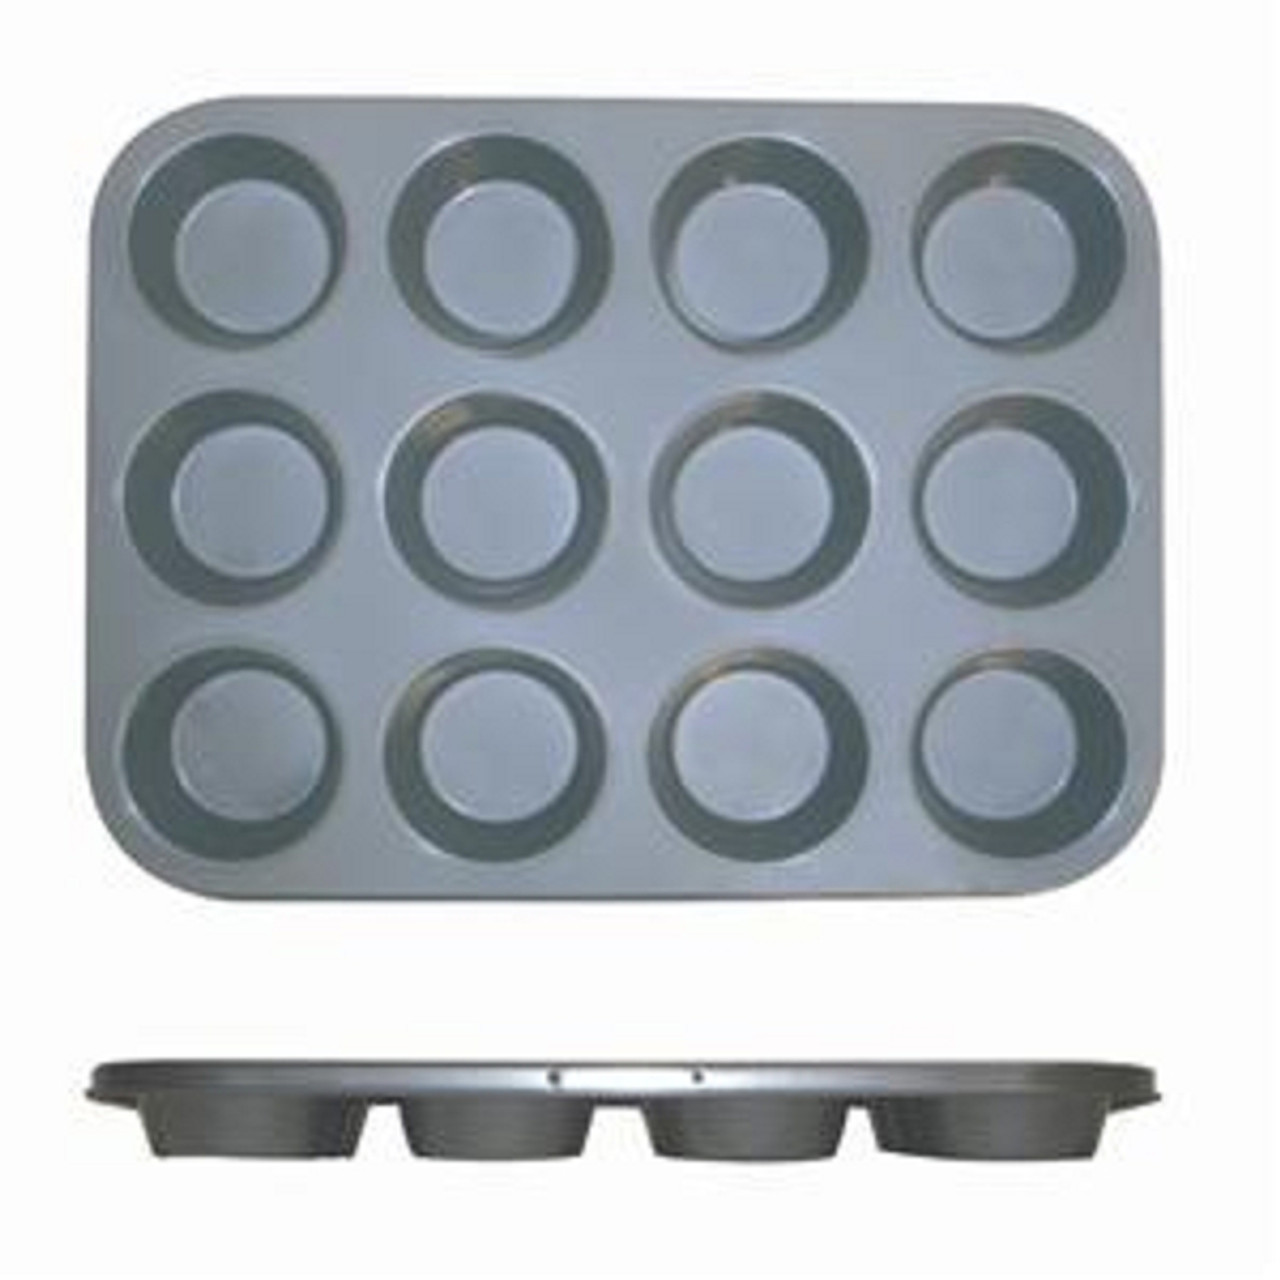 https://cdn11.bigcommerce.com/s-3n1nnt5qyw/images/stencil/1280x1280/products/27889/30470/thunder-group-12-cup-muffin-pan-non-stick-0-4m-m-3-5-oz-each-cup-model-slkmp012-12__94292.1629773777.jpg?c=1